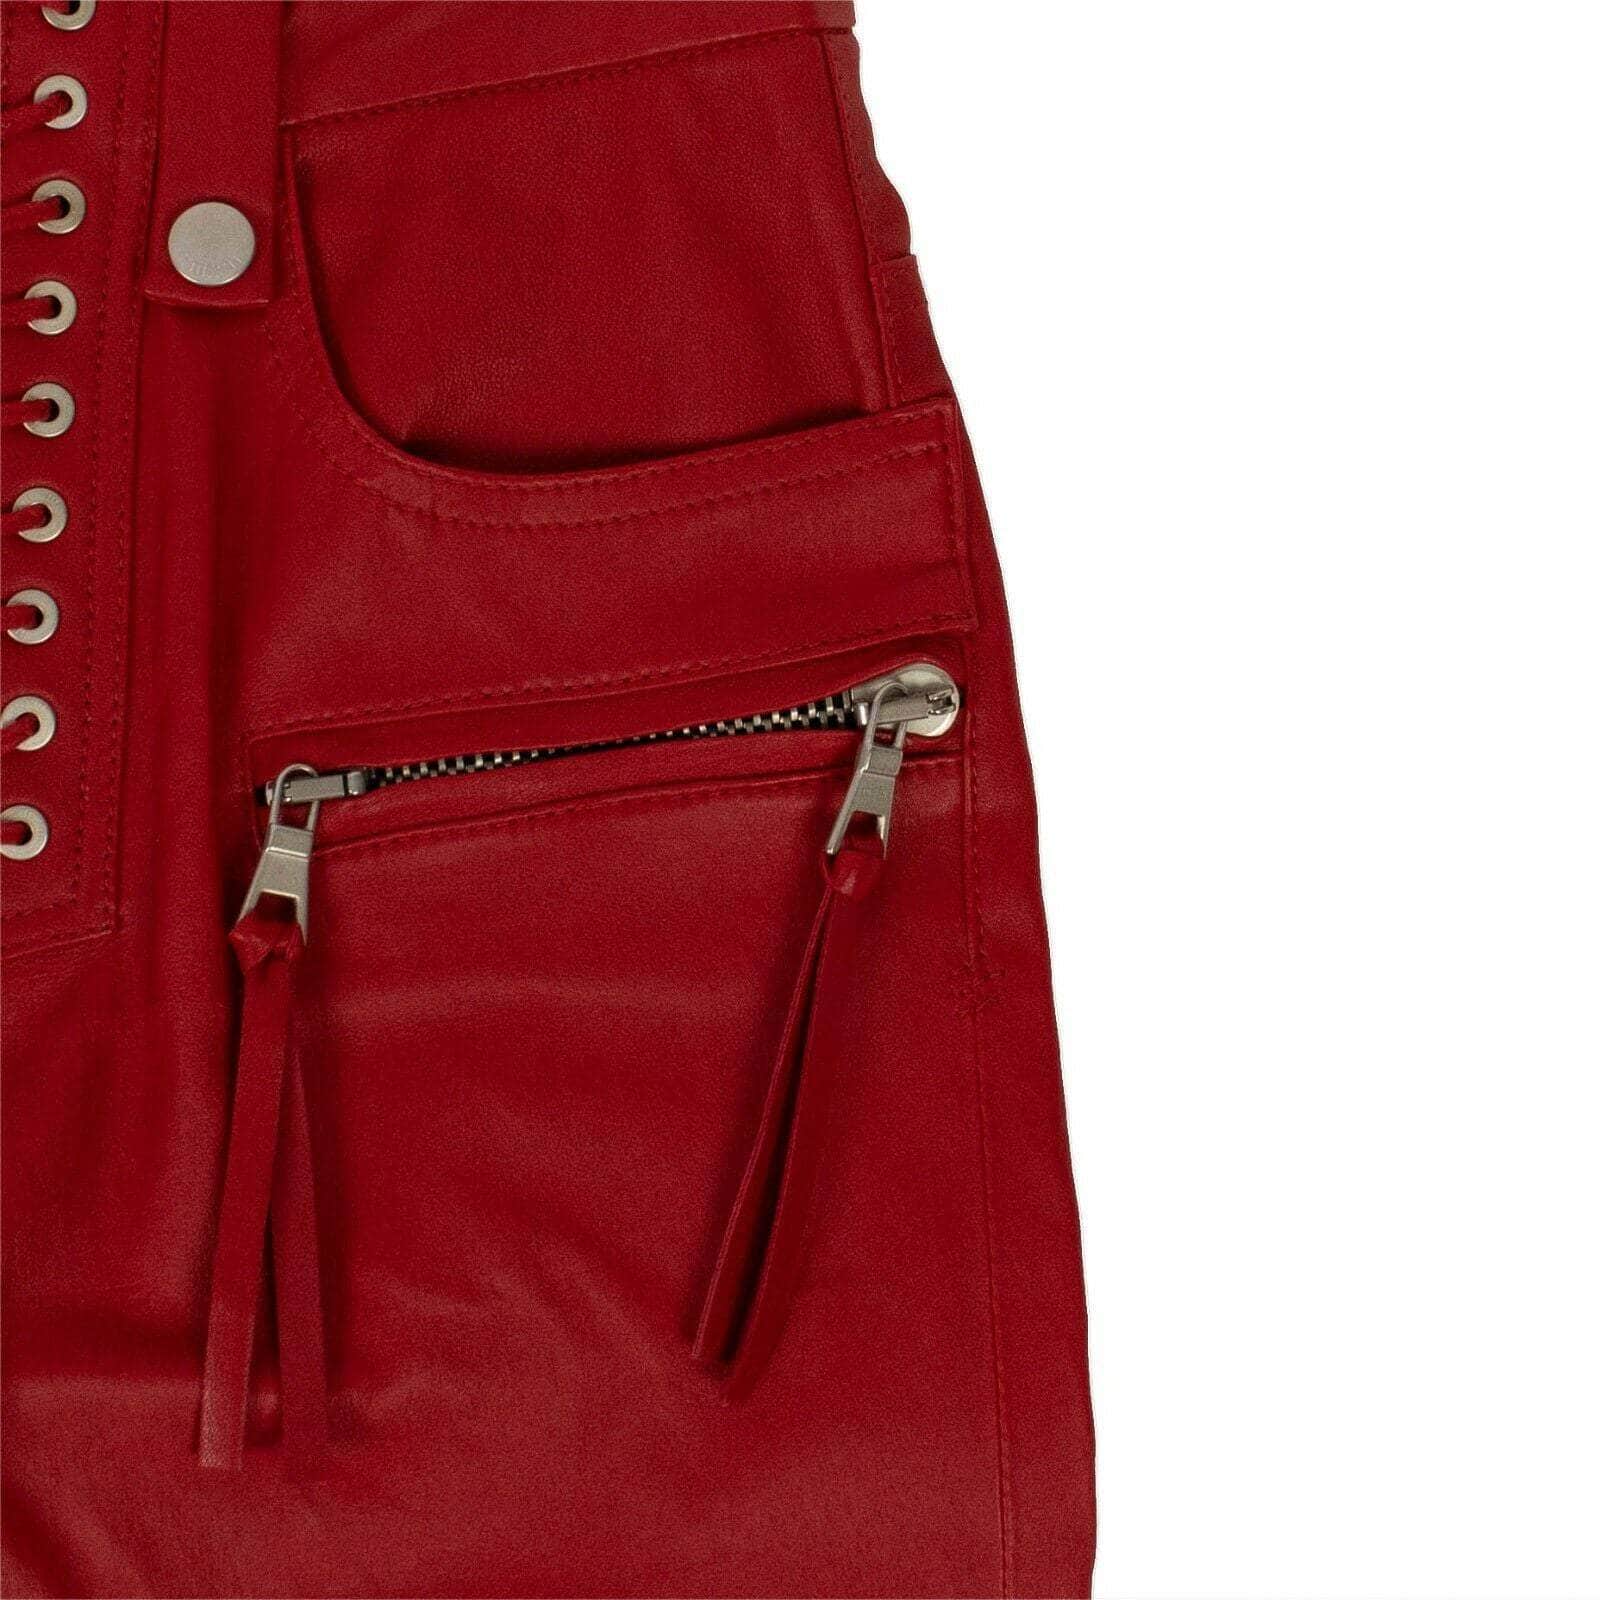 Unravel Project Women's Pants 26 Leather Cropped Plonge Lace-Up Pants - Red 74NGG-UN-1013/26 74NGG-UN-1013/26